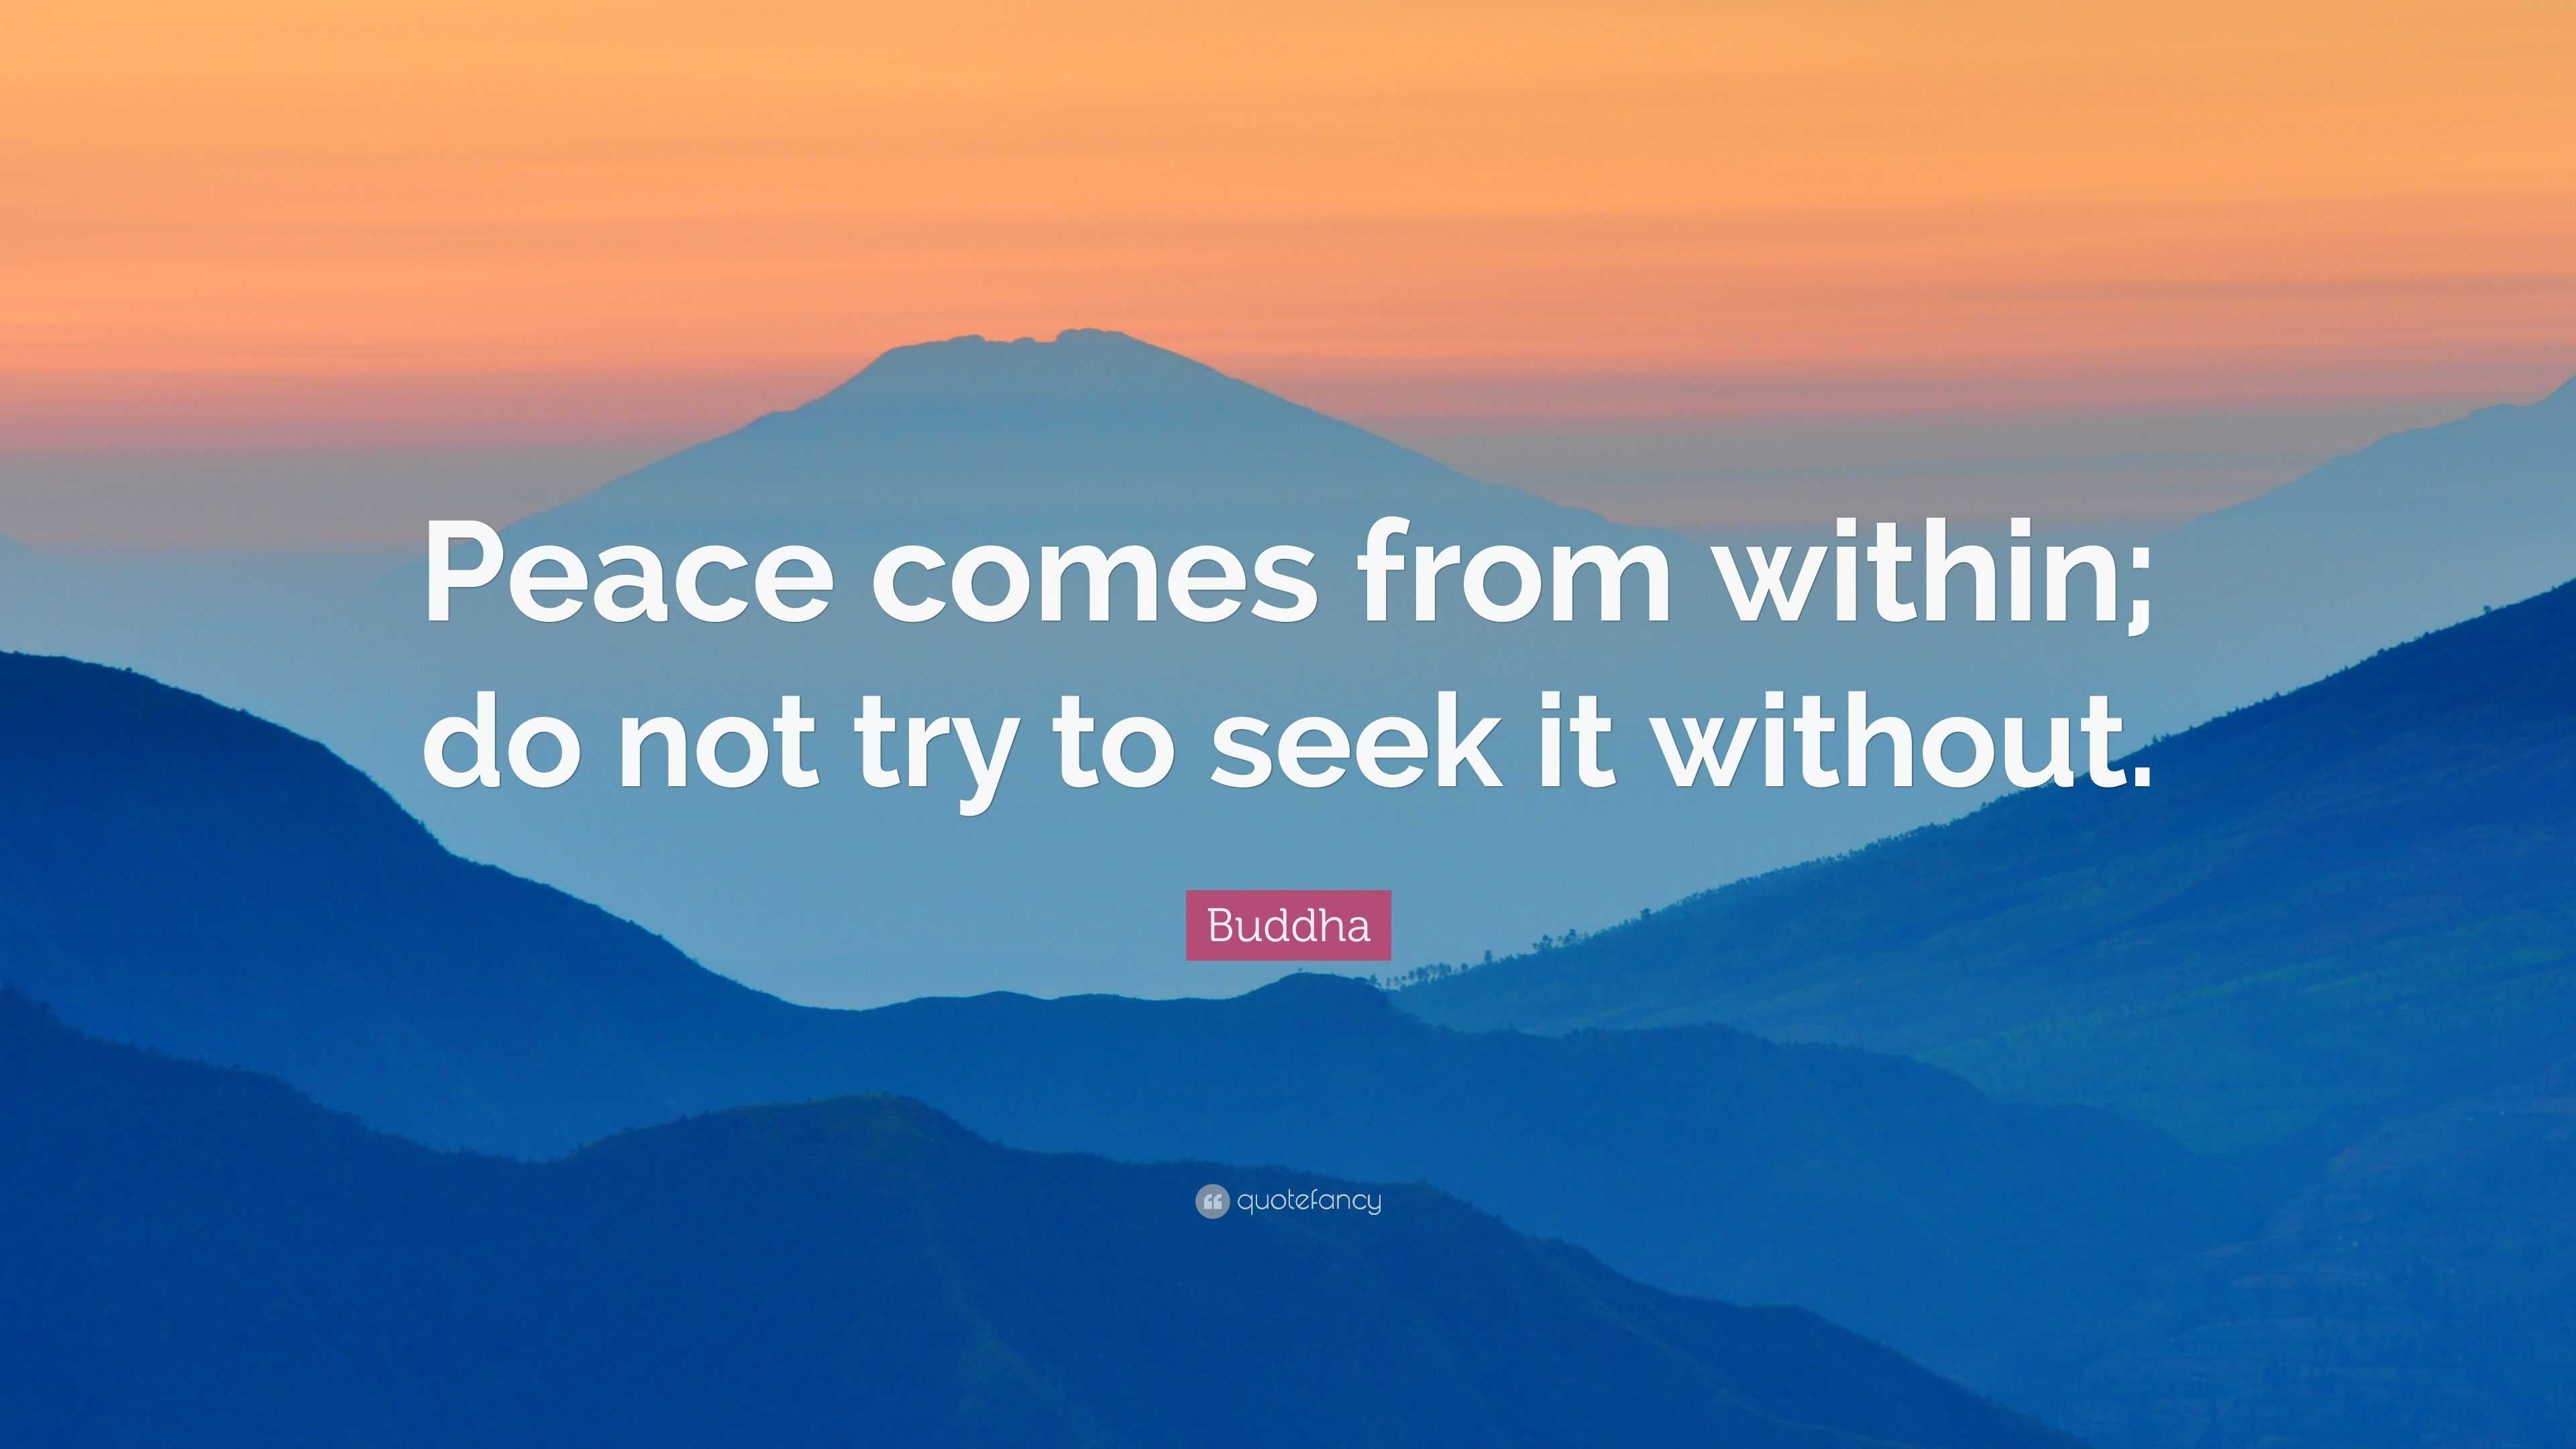 Buddha Quote: “Peace comes from within; do not try to seek it without.”